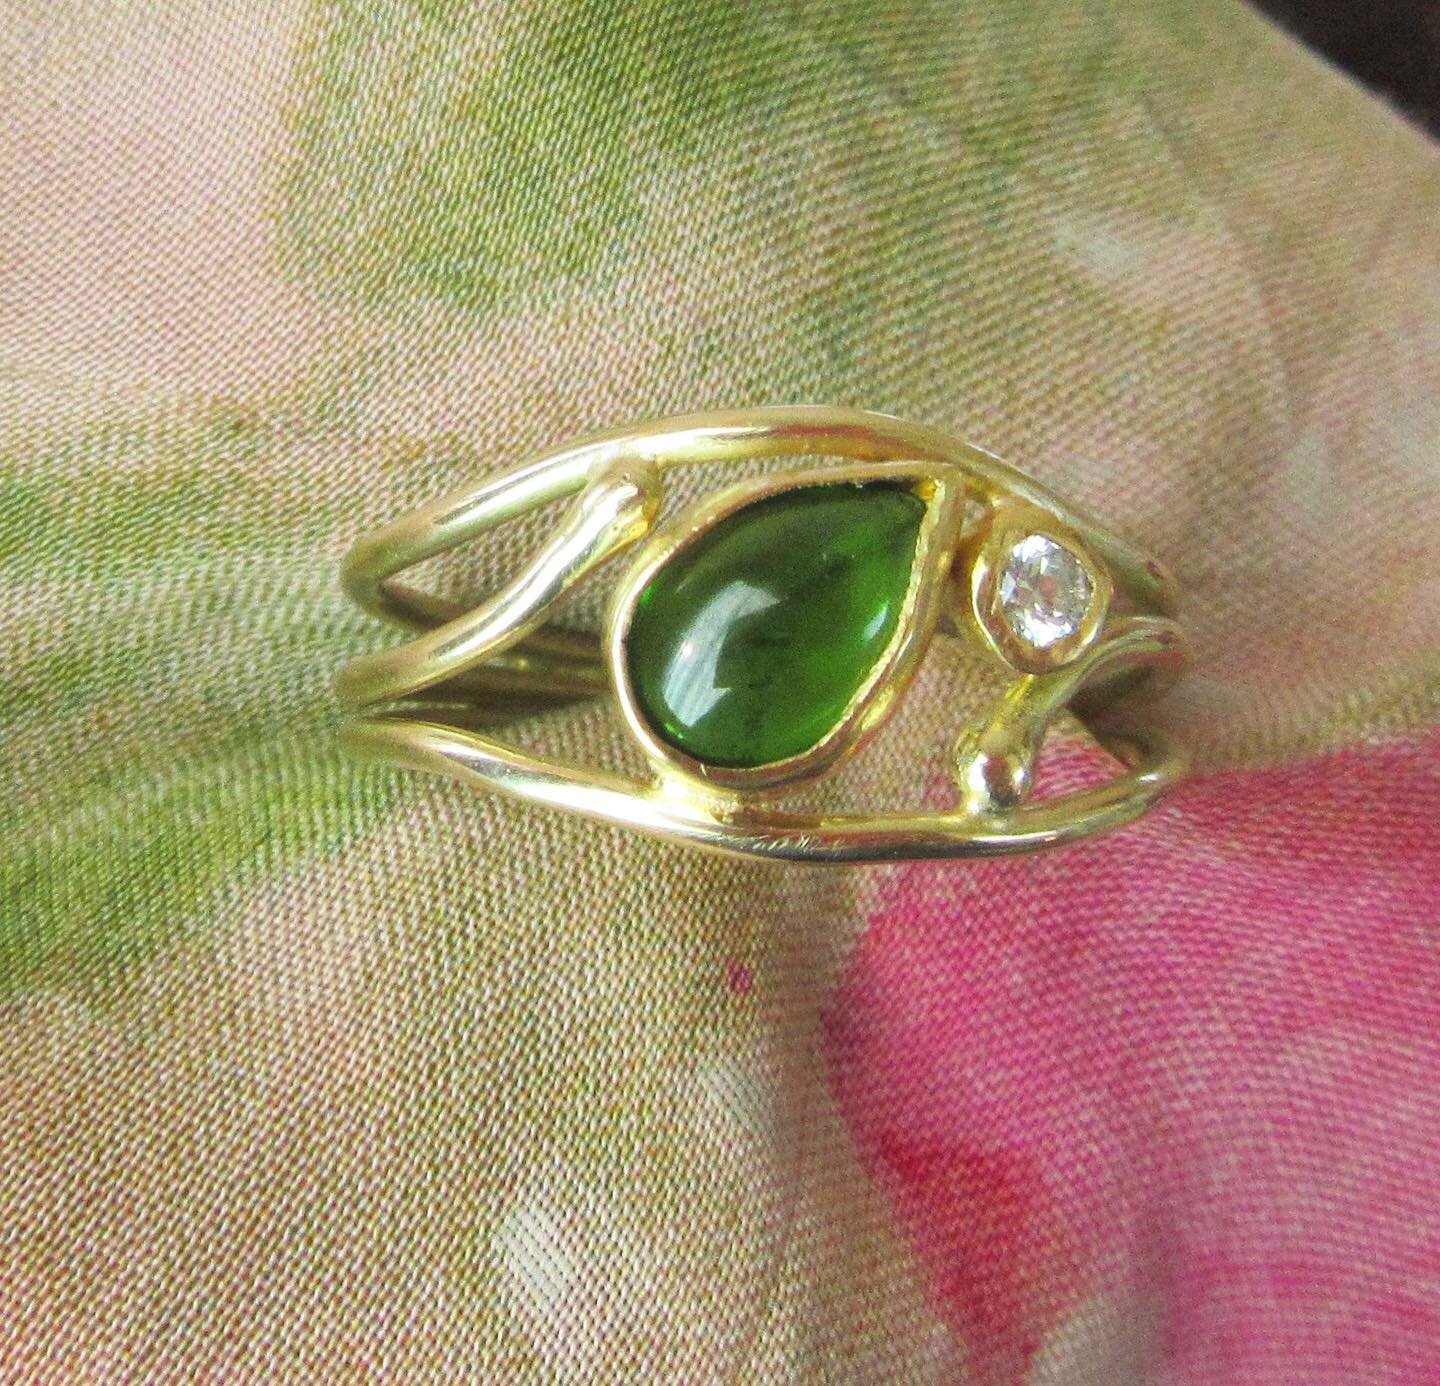 Check out this chrome tourmaline 1.01 carat with ring with a .07 carat diamond in 22k and 18k gold. This beauty is available for sale and was designed and created by Karen.